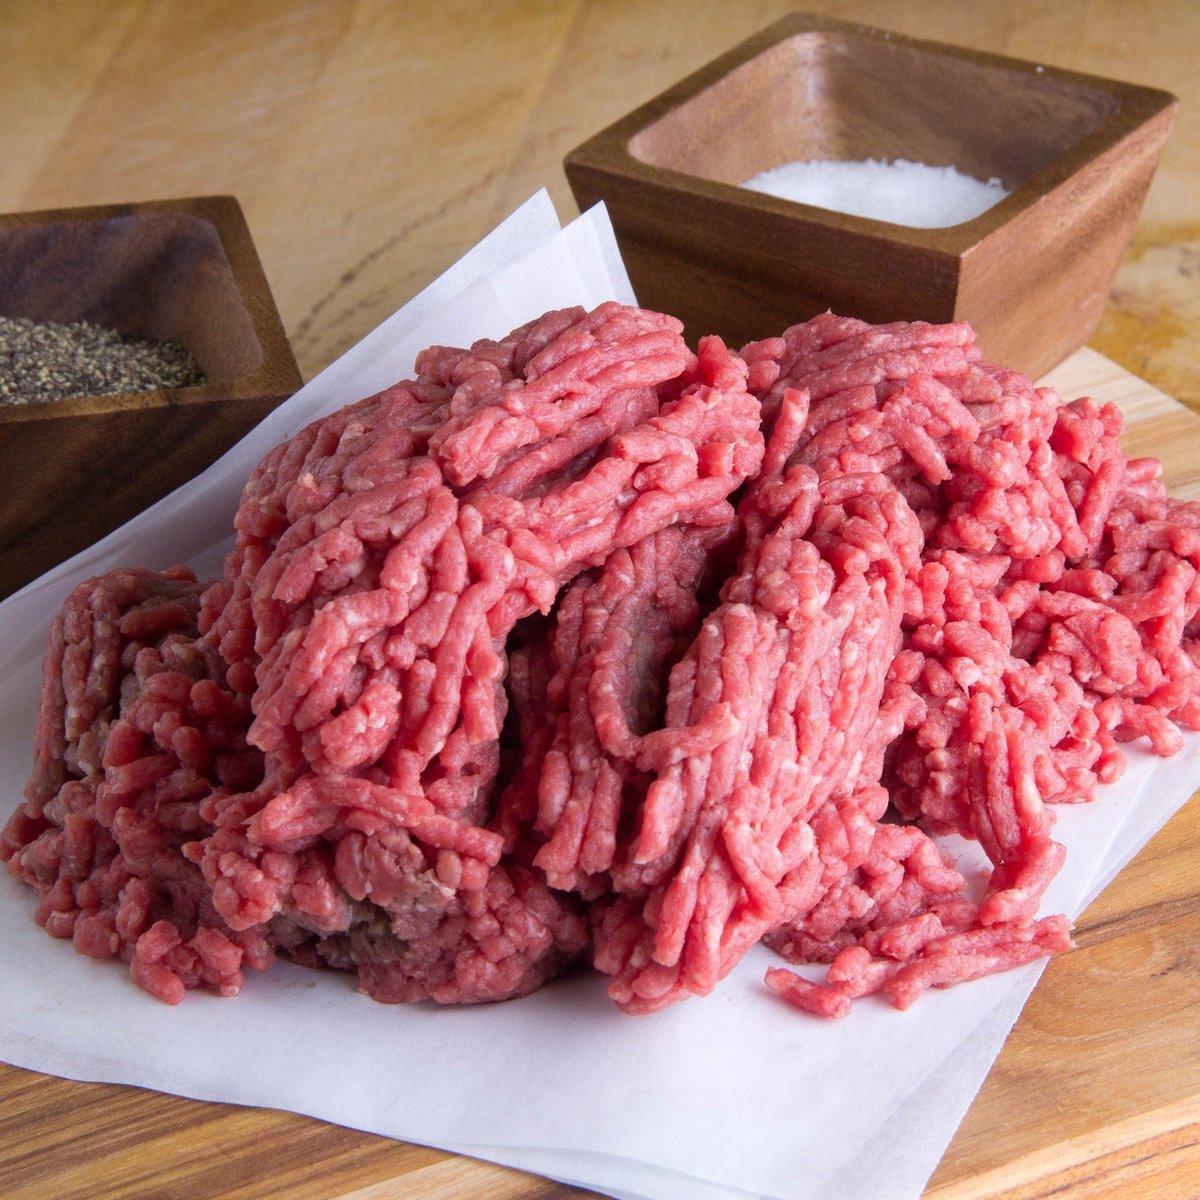 ADD 5 LBS OF OUR PREMIUM GROUND BEEF TO YOUR ORDER - Heartstone Farm